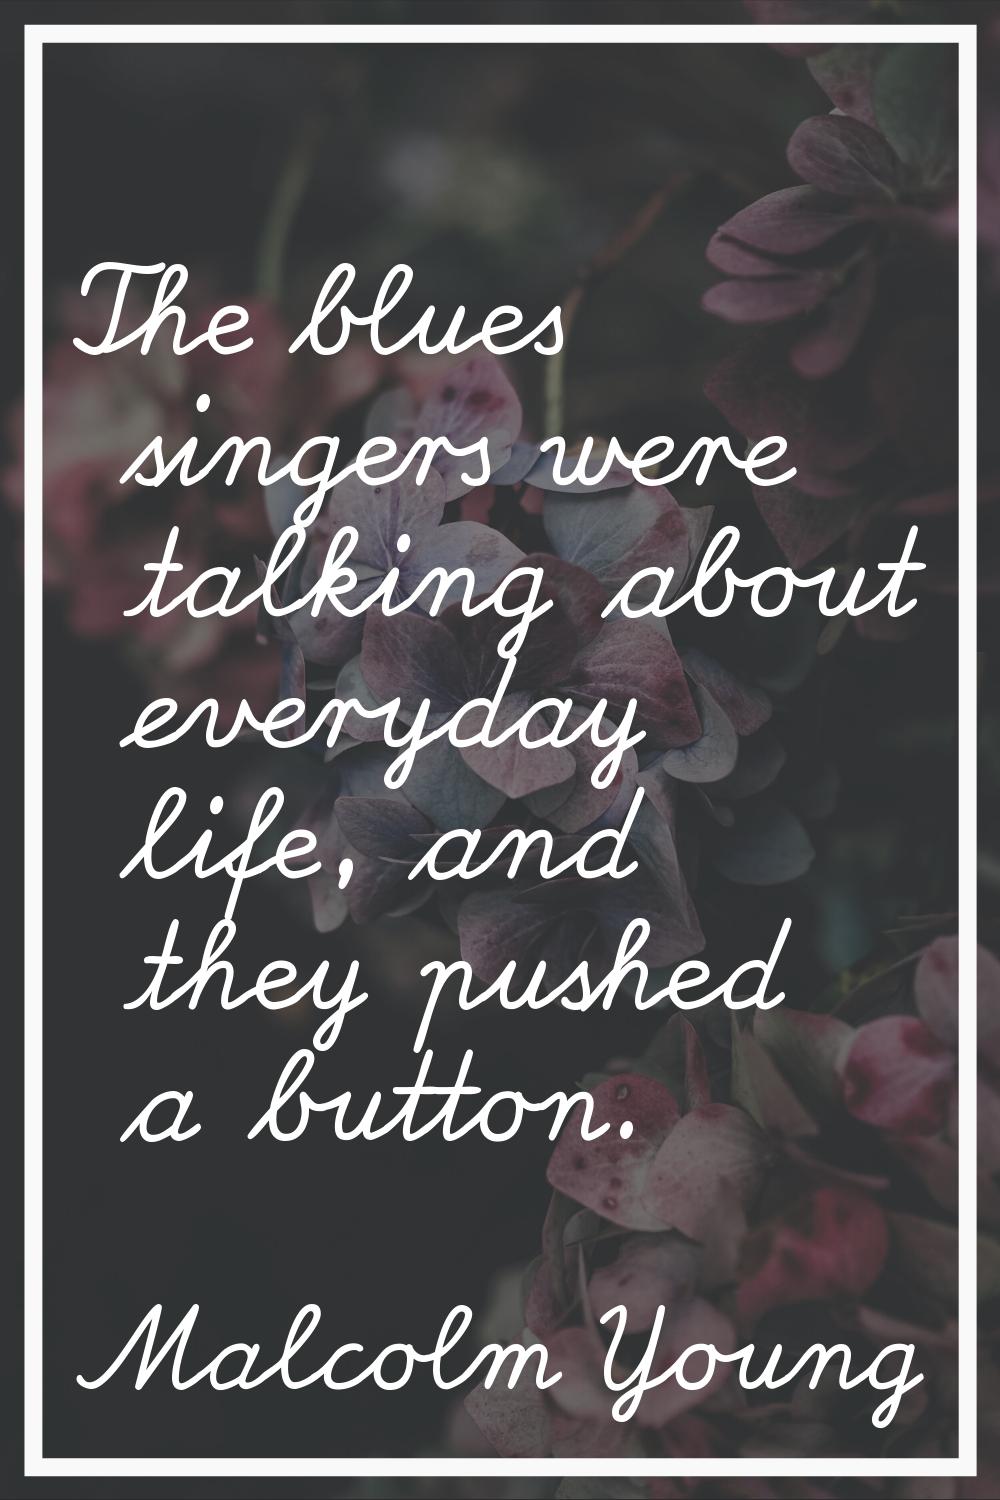 The blues singers were talking about everyday life, and they pushed a button.